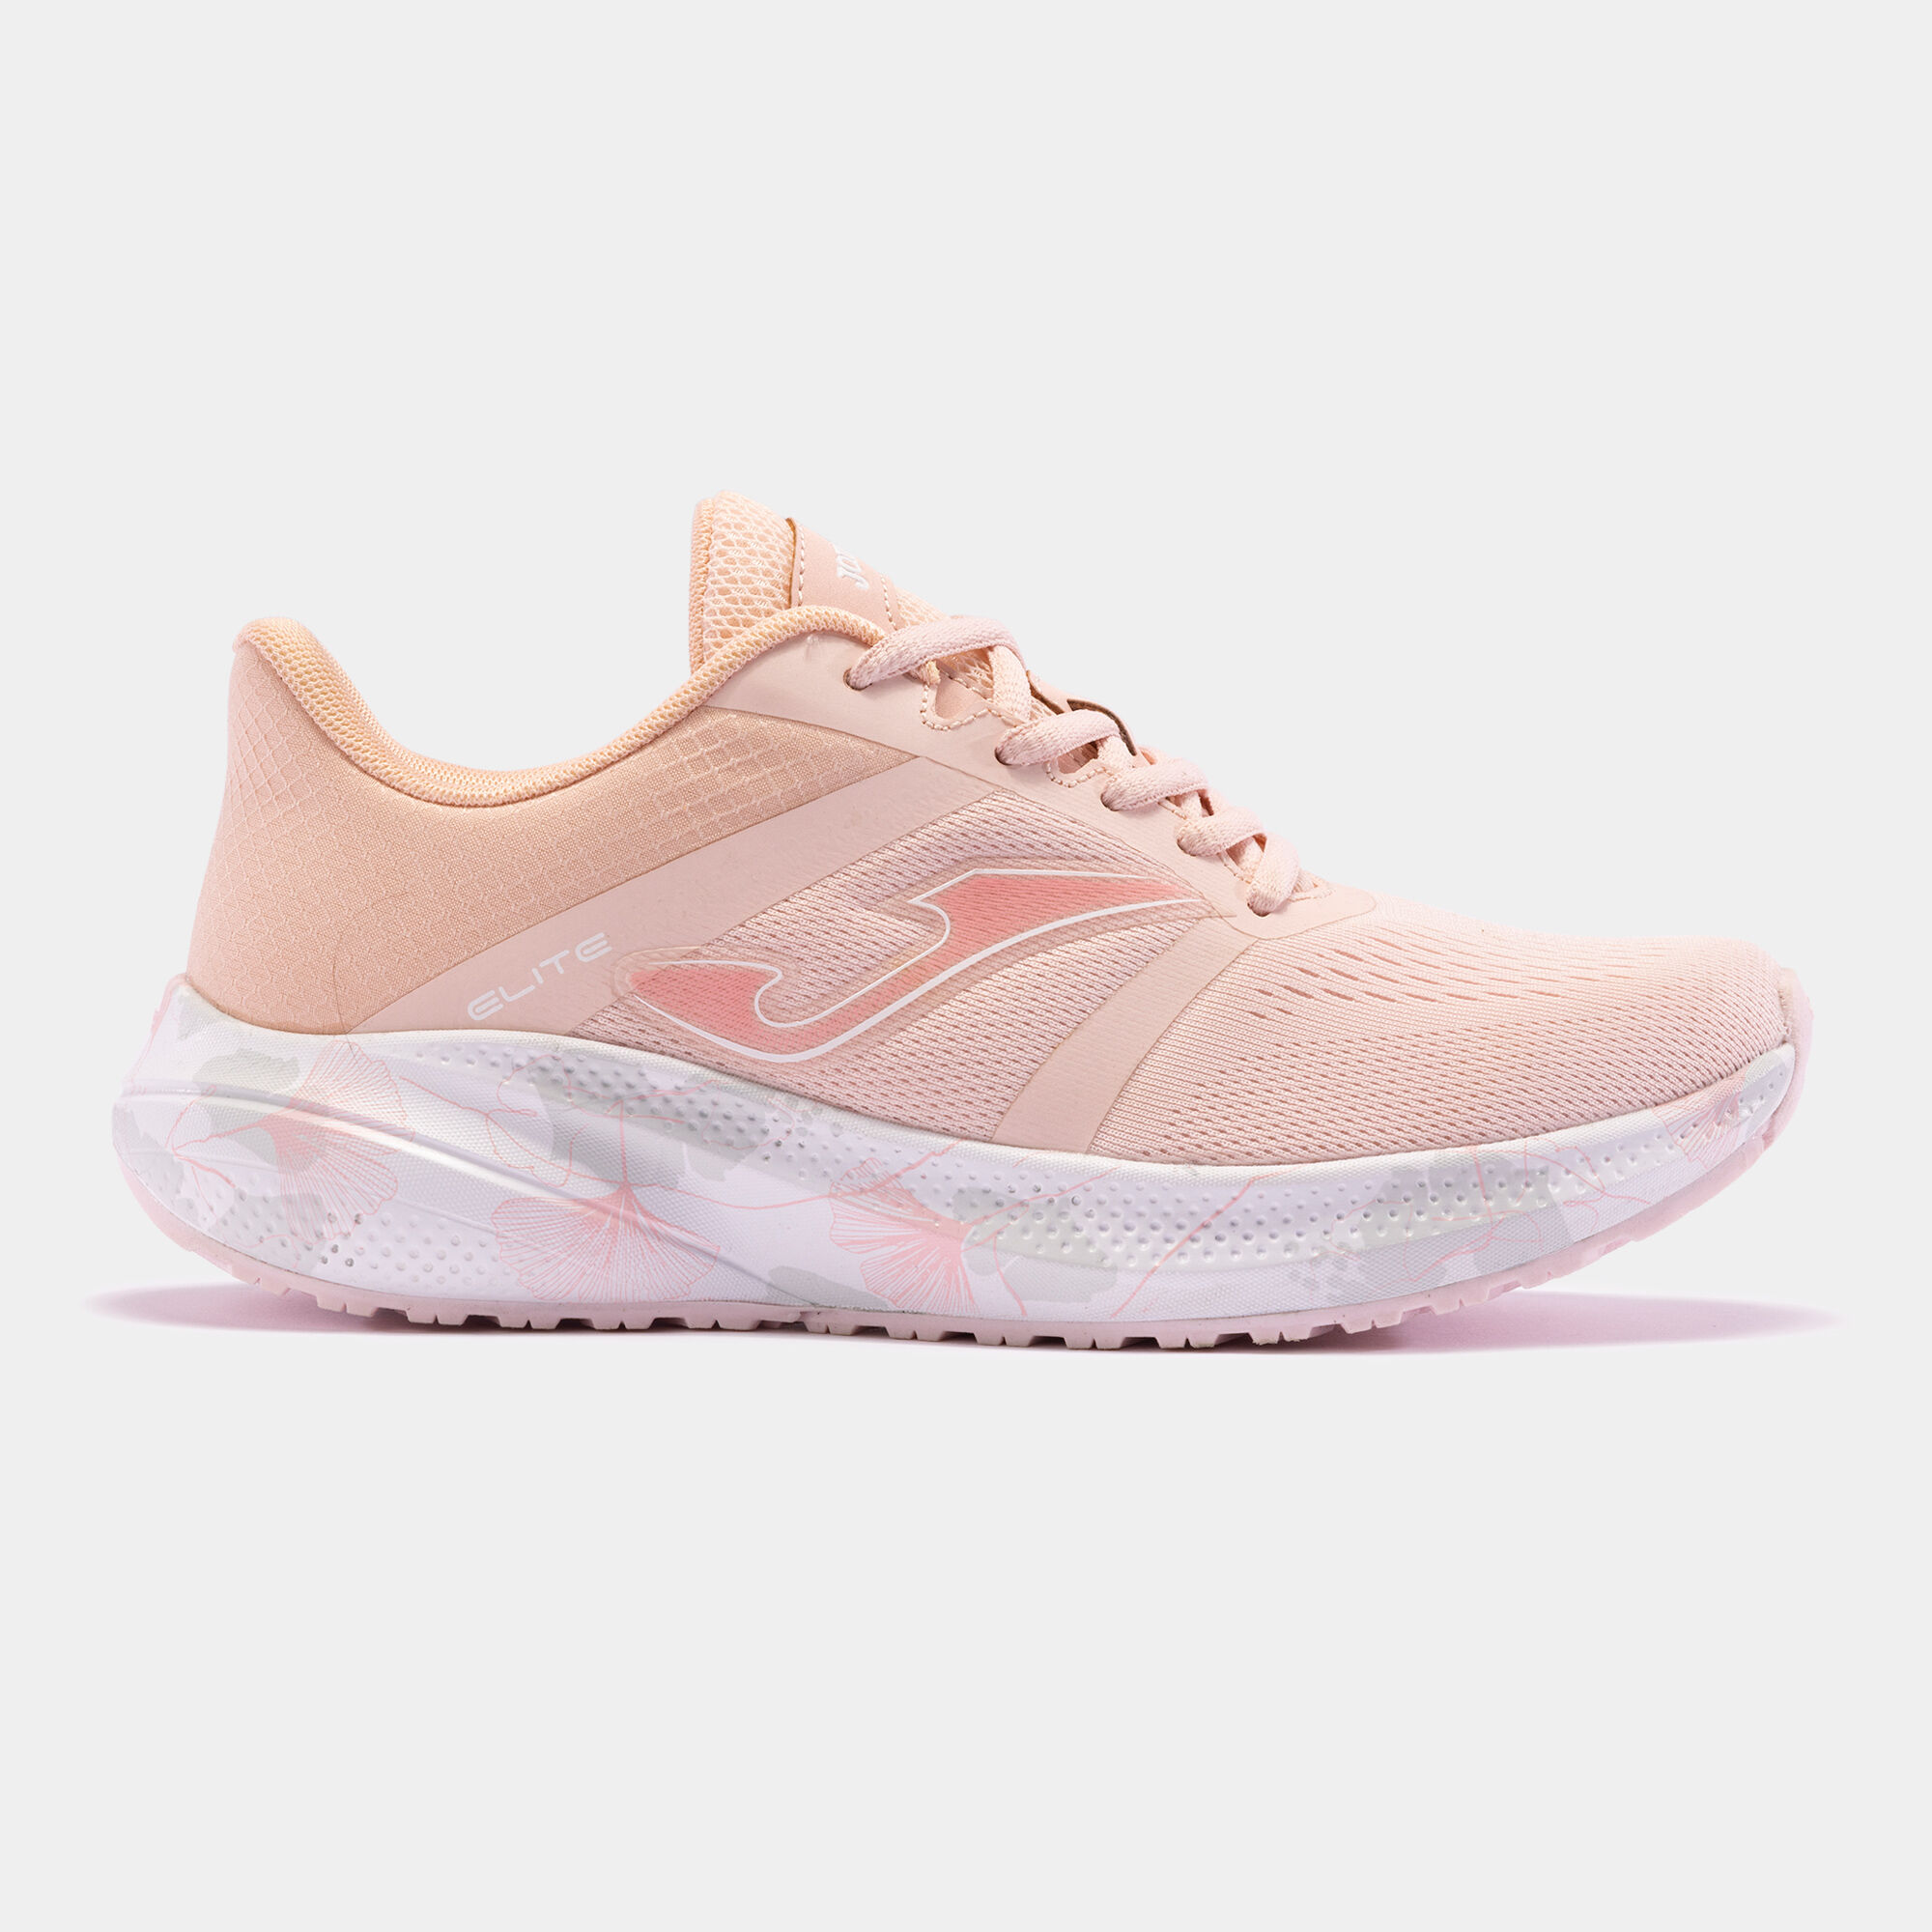 Chaussures running Elite Lady 24 femme rose